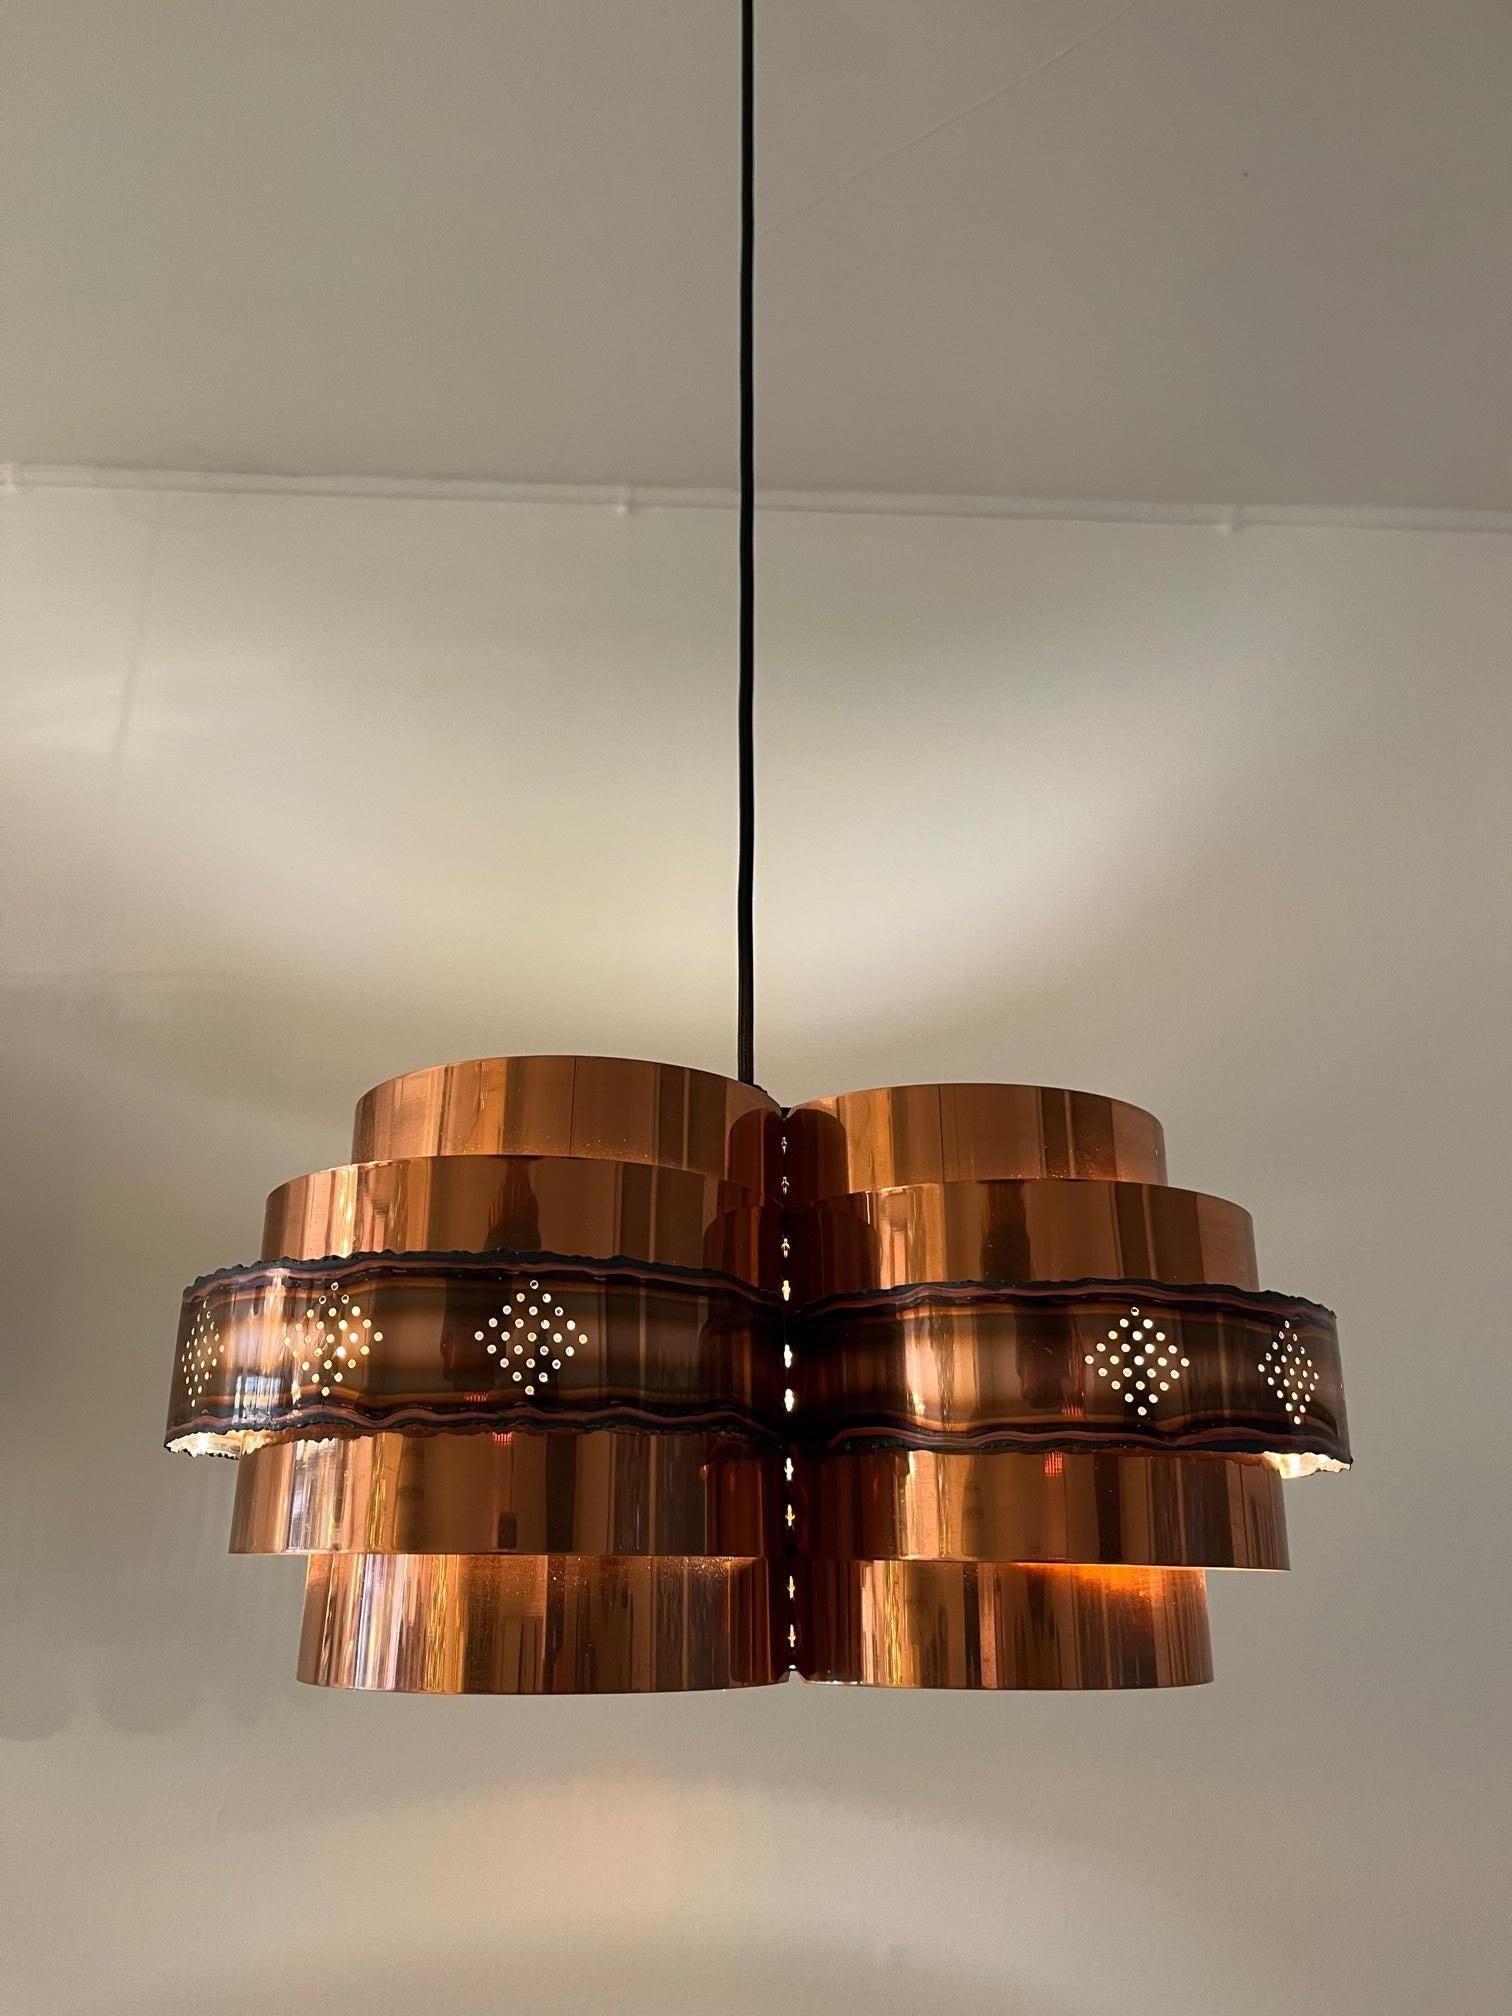 Mid-20th Century Danish Copper Pendant Lamp by Verner Schou ca. 1960s For Sale